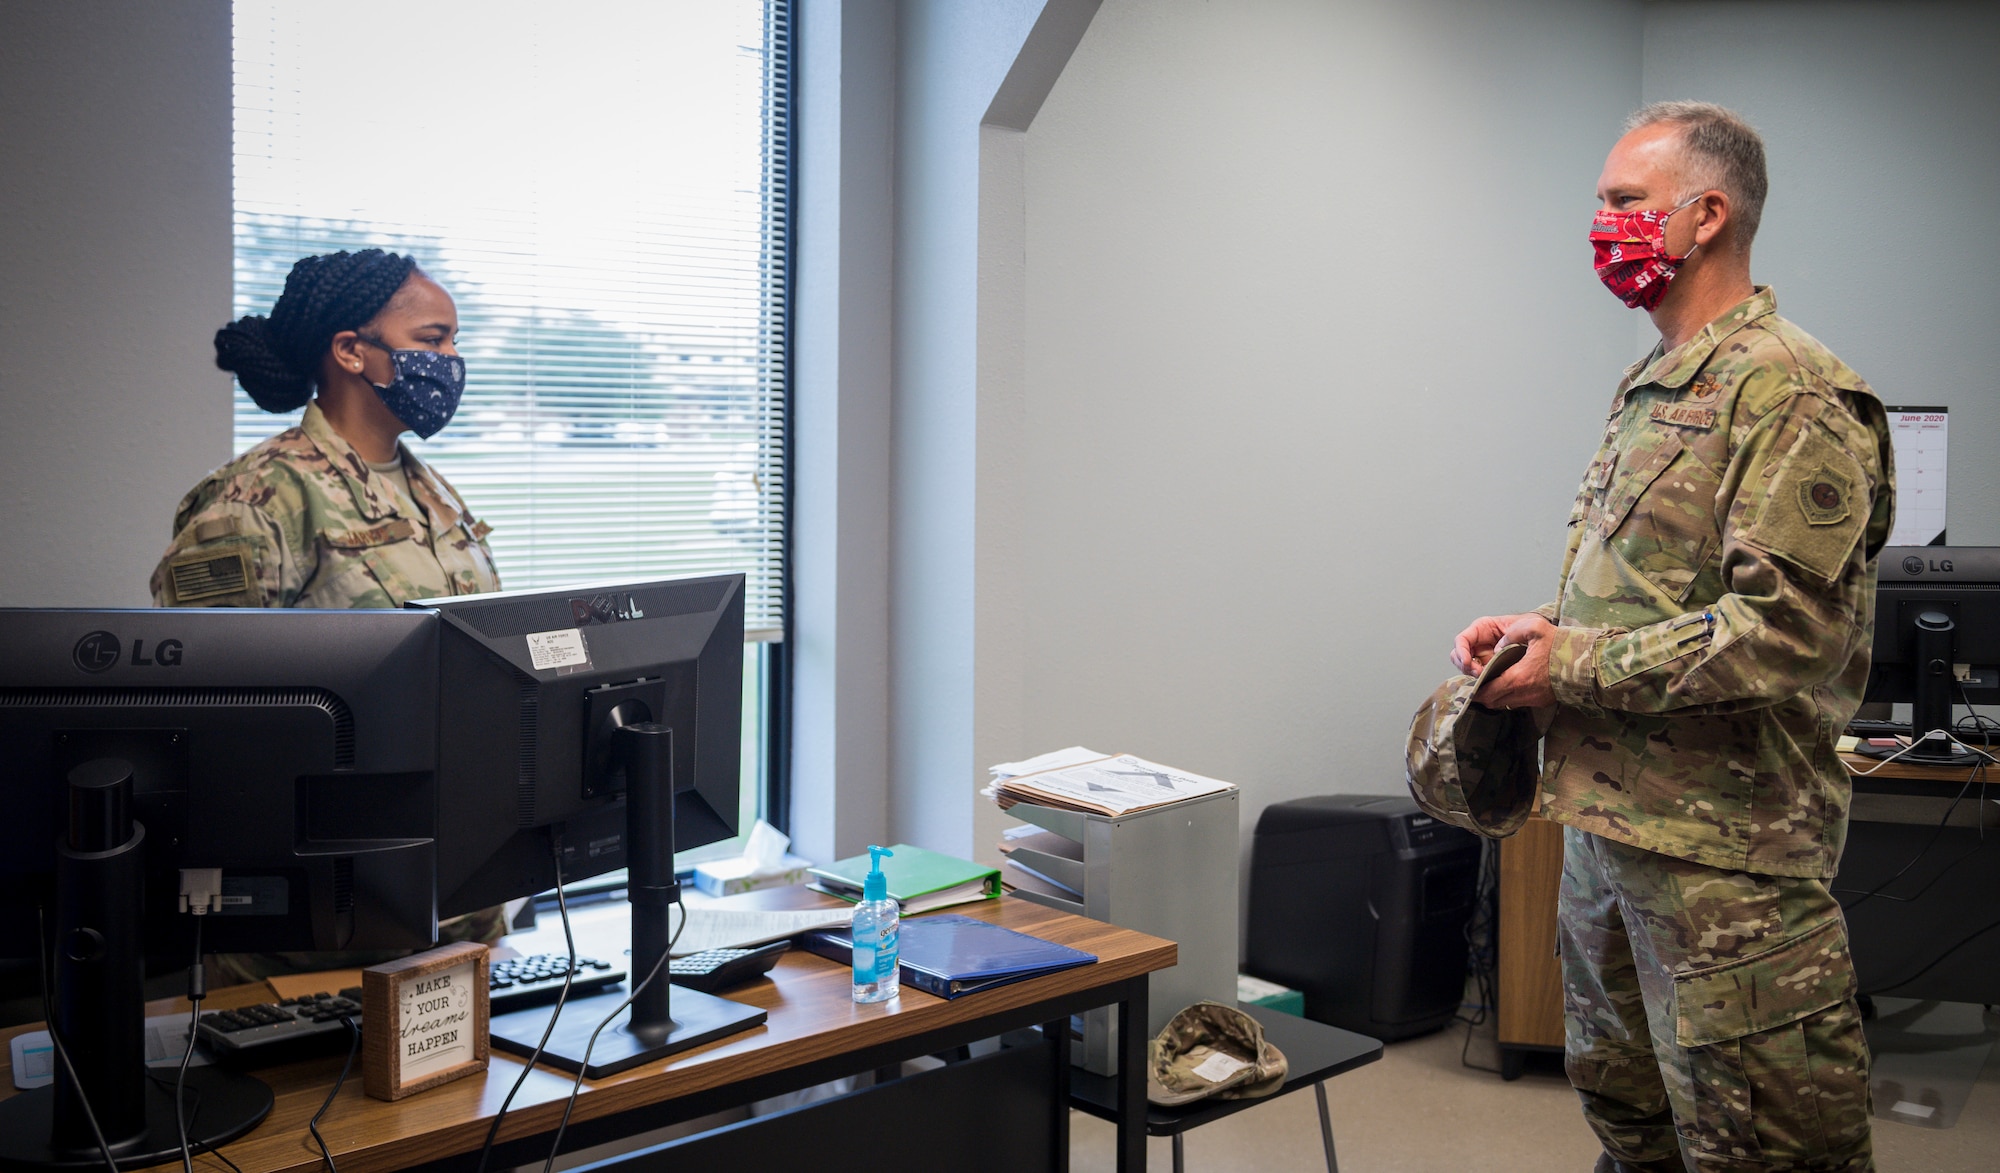 Senior Airman Destiny Jarvis, 2nd Logistics Readiness Squadron traffic management office personal property counselor, briefs Col. Michael Miller, 2nd Bomb Wing commander, on her role in the new River’s Edge Welcome Center  at Barksdale Air Force Base, La., June 29, 2020